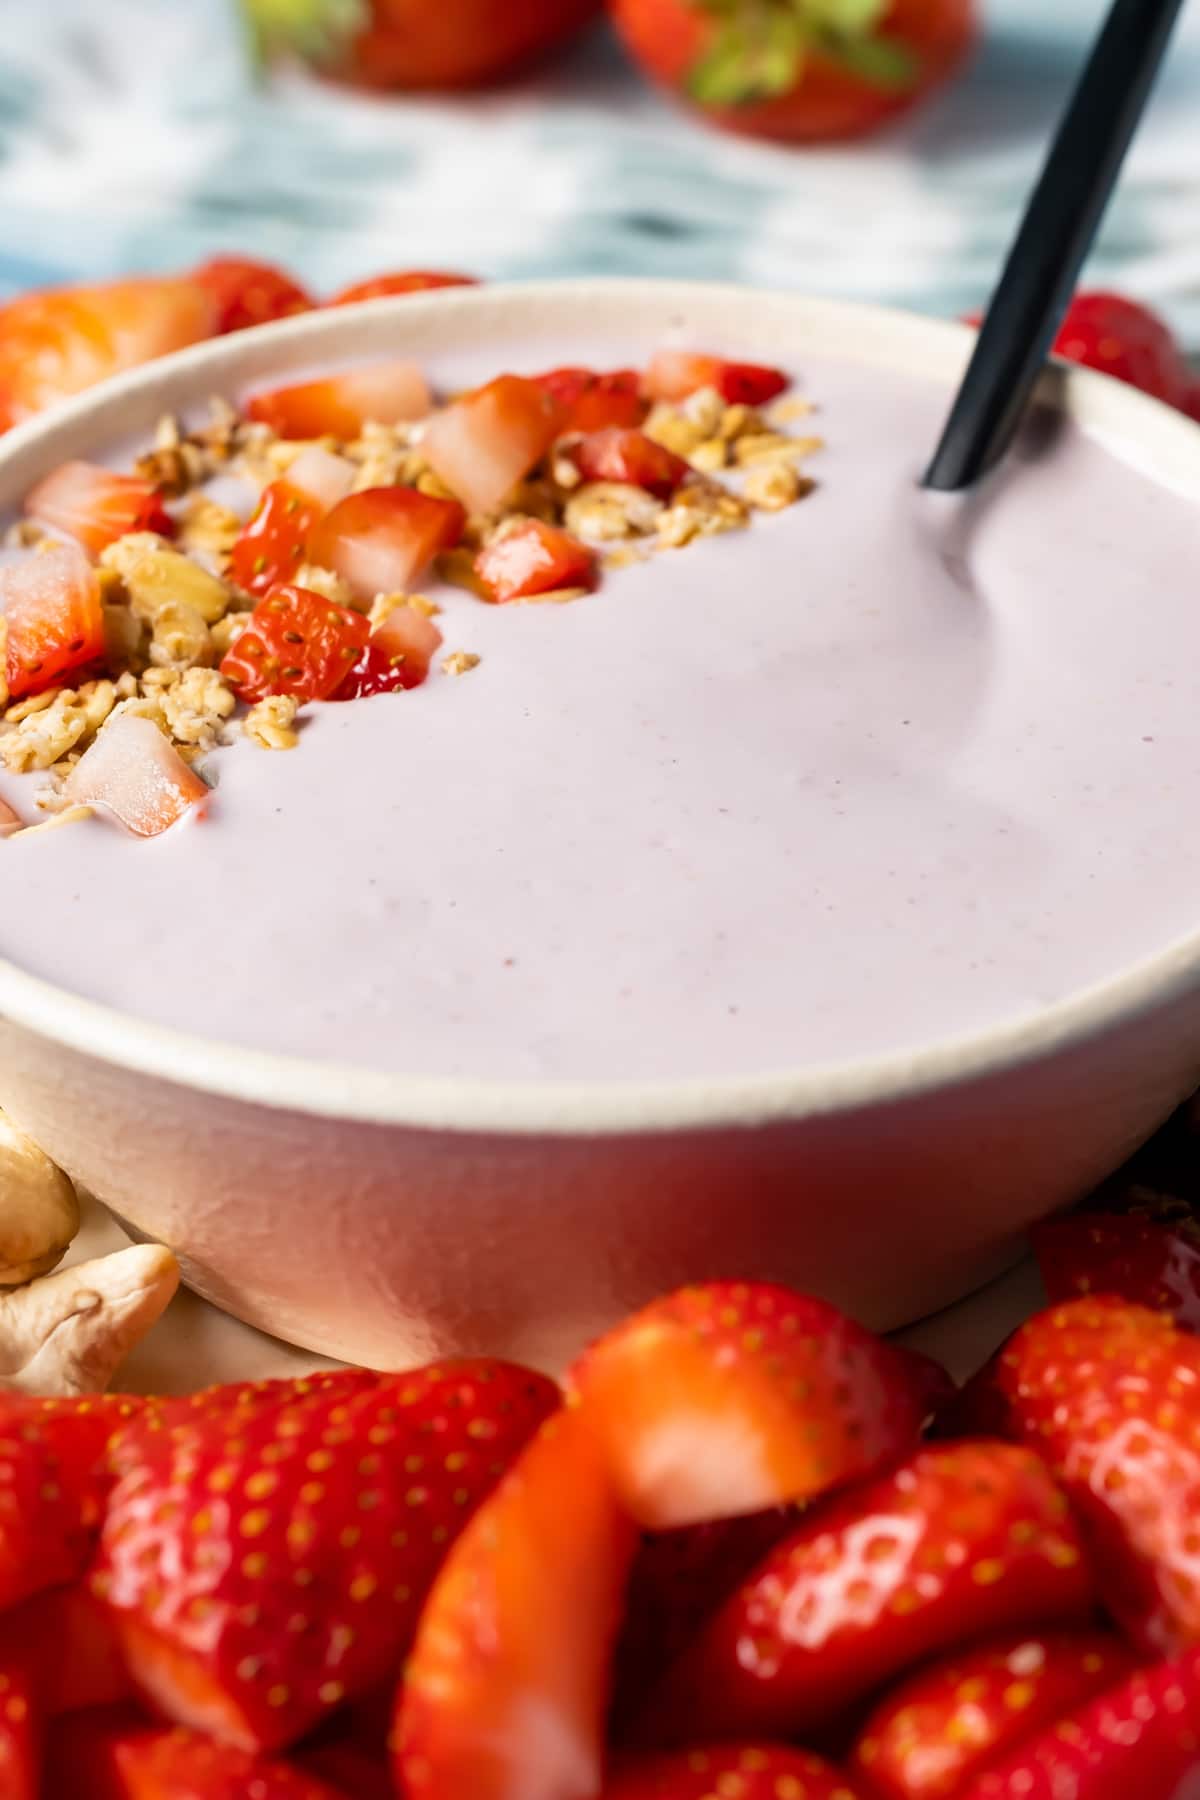 Vegan yogurt topped with granola and sliced strawberries in a bowl with a spoon.